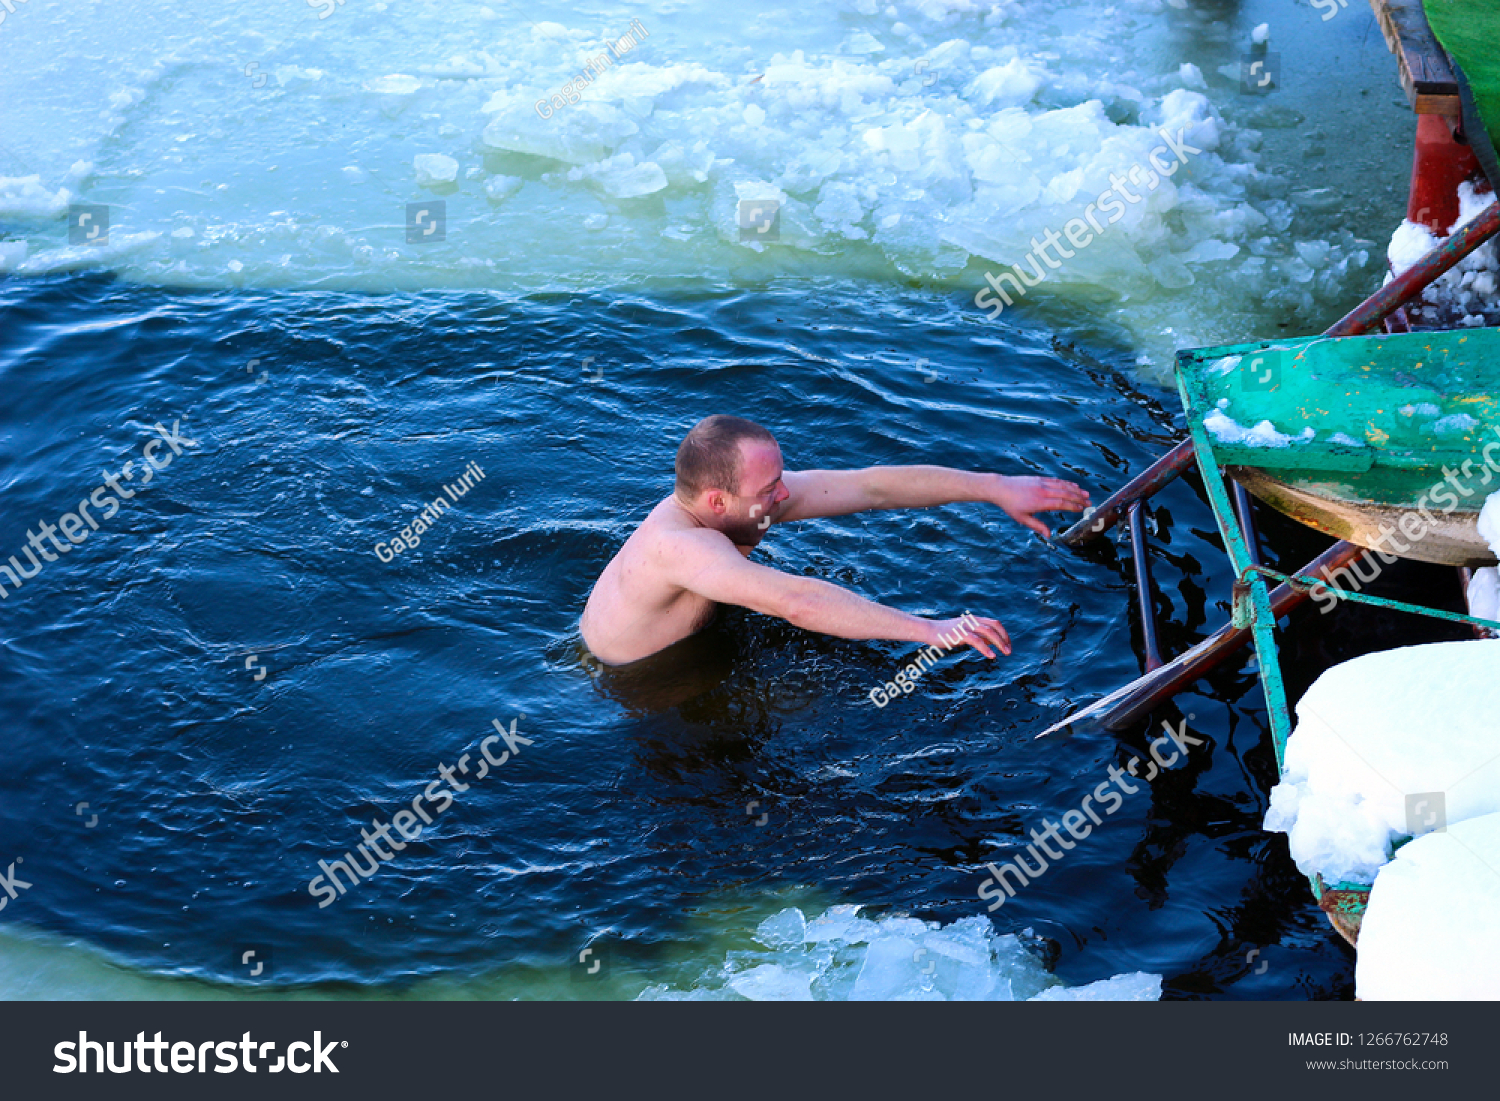 A man with a cry runs out of the ice-hole of the lake, a light motion blur as an artistic device to enhance the dynamics of the event. #1266762748